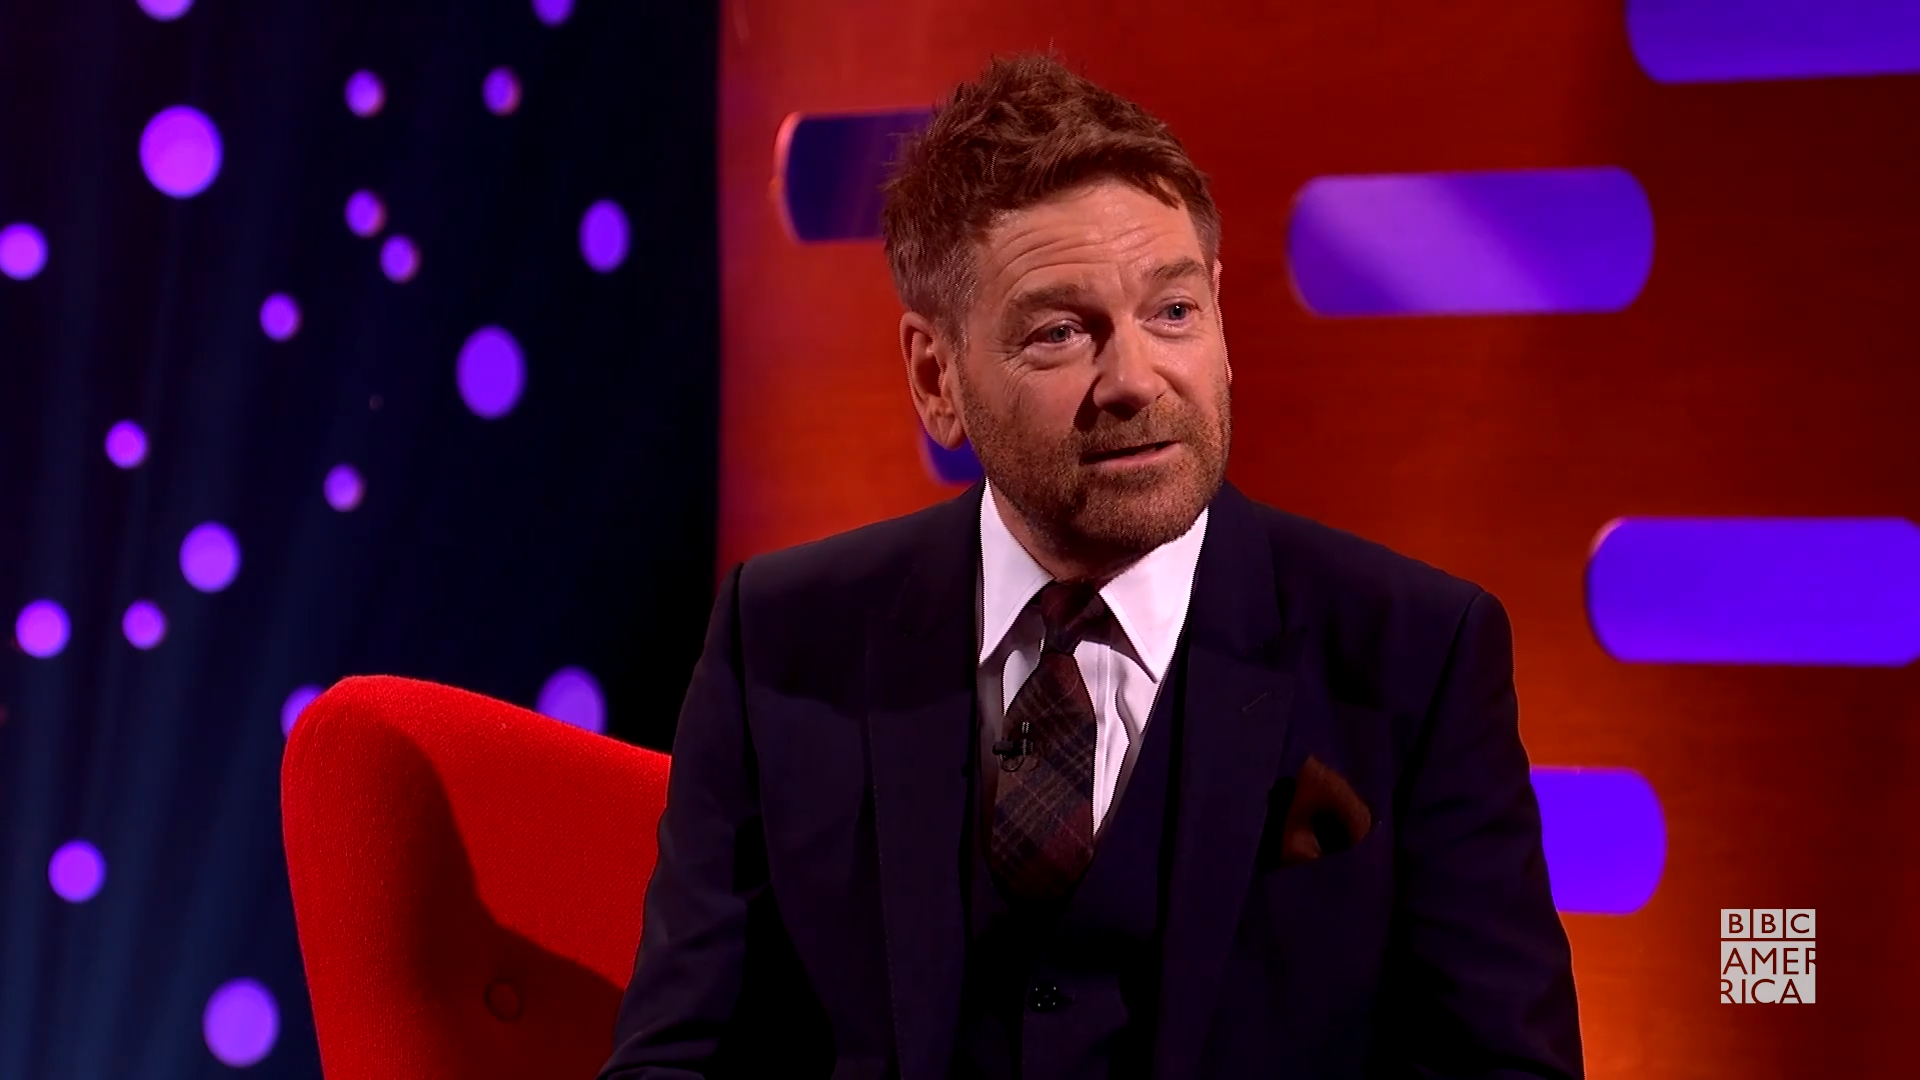 Watch The Riot That Ended Kenneth Branagh’s Childhood | The Graham Norton Show Video Extras